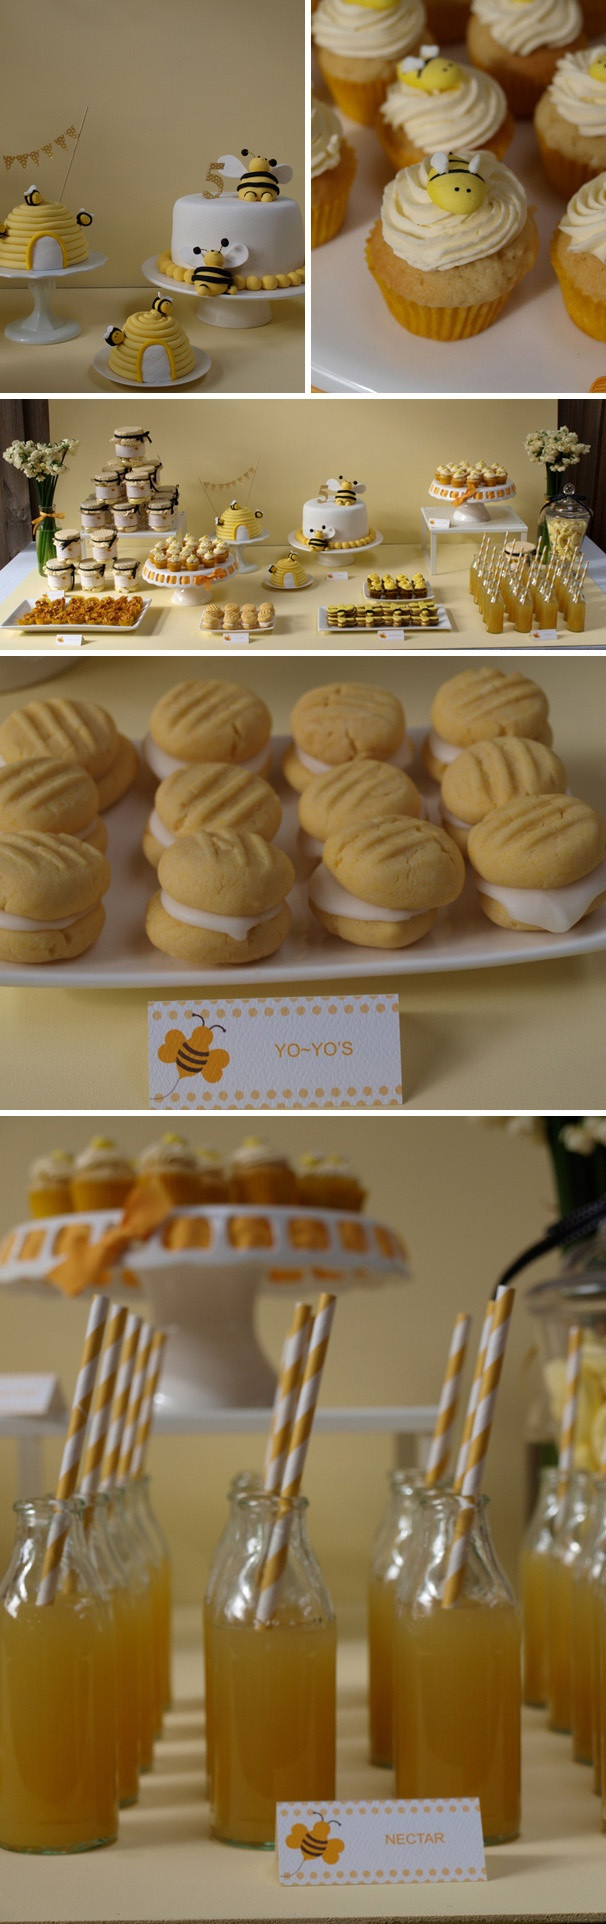 Bumble Bee Party Food Ideas
 55 best images about Bumble Bee Party on Pinterest